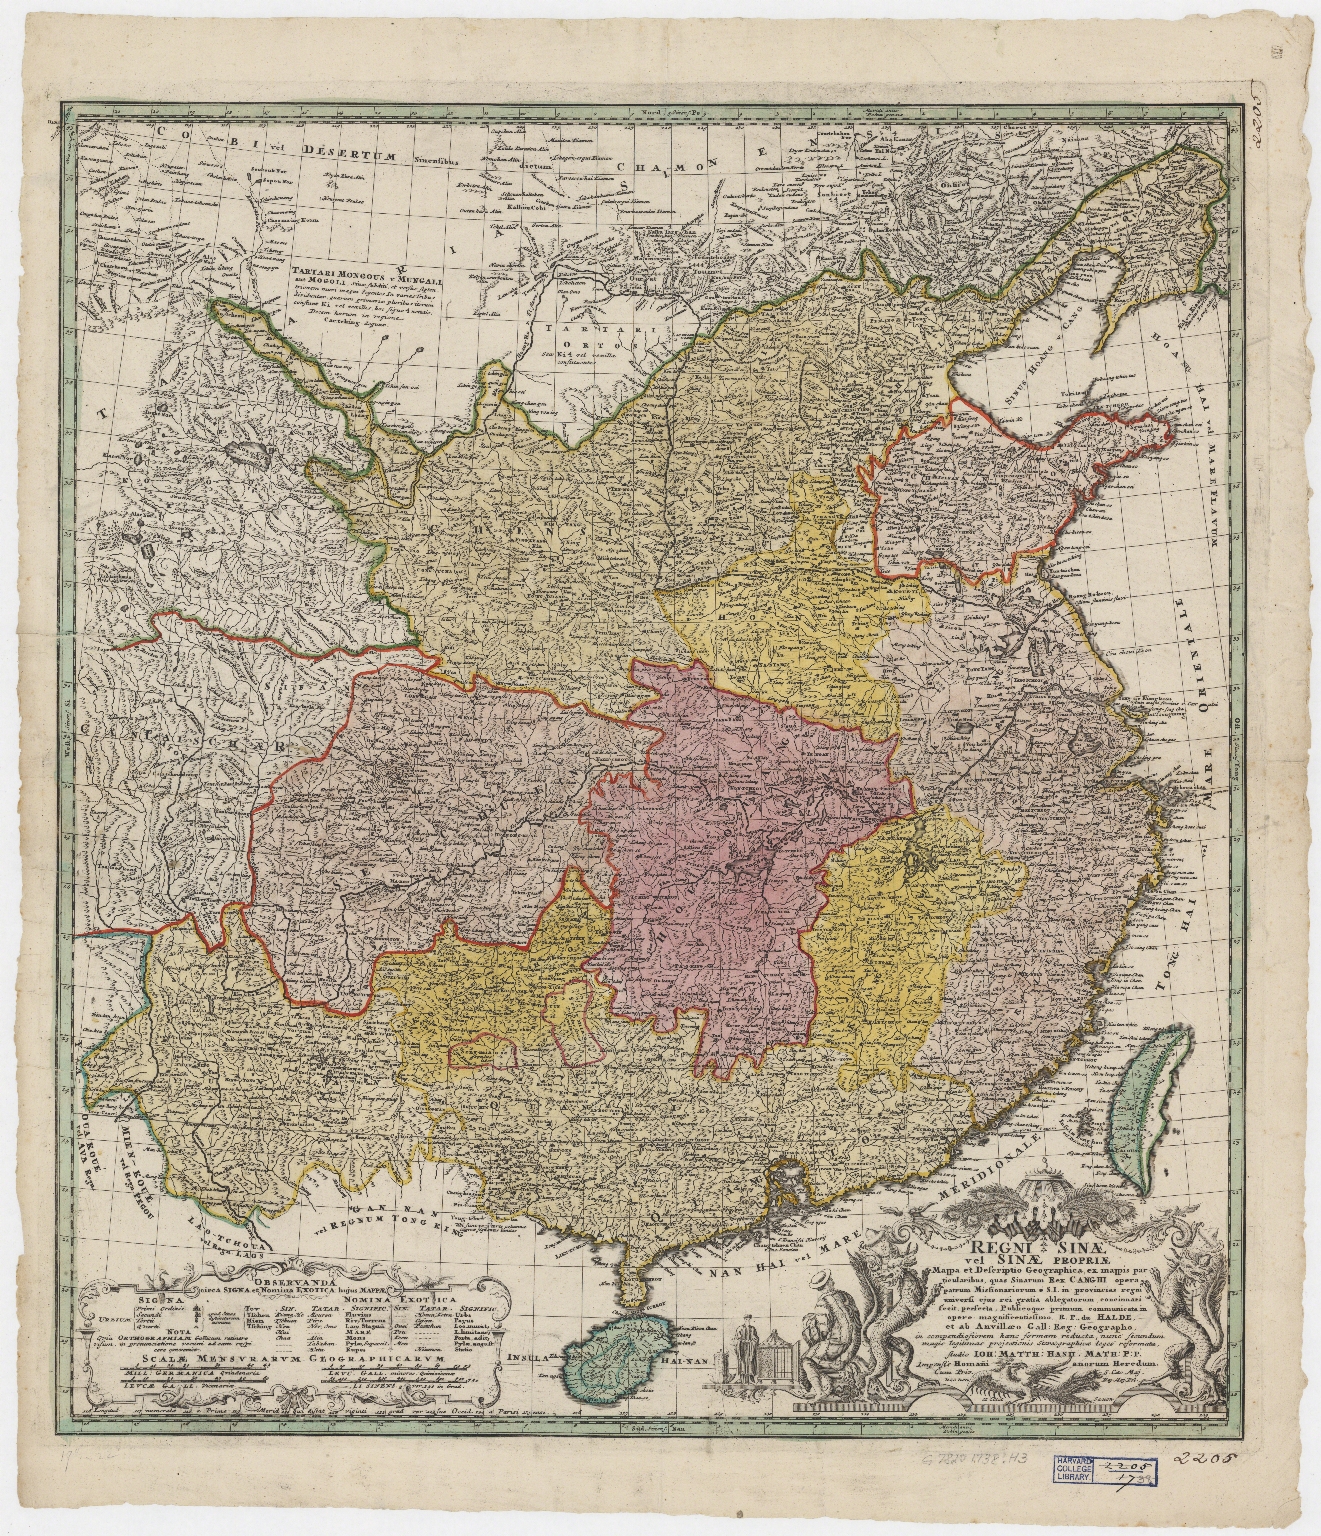 Map of China, and a description of the work of missionaries in China